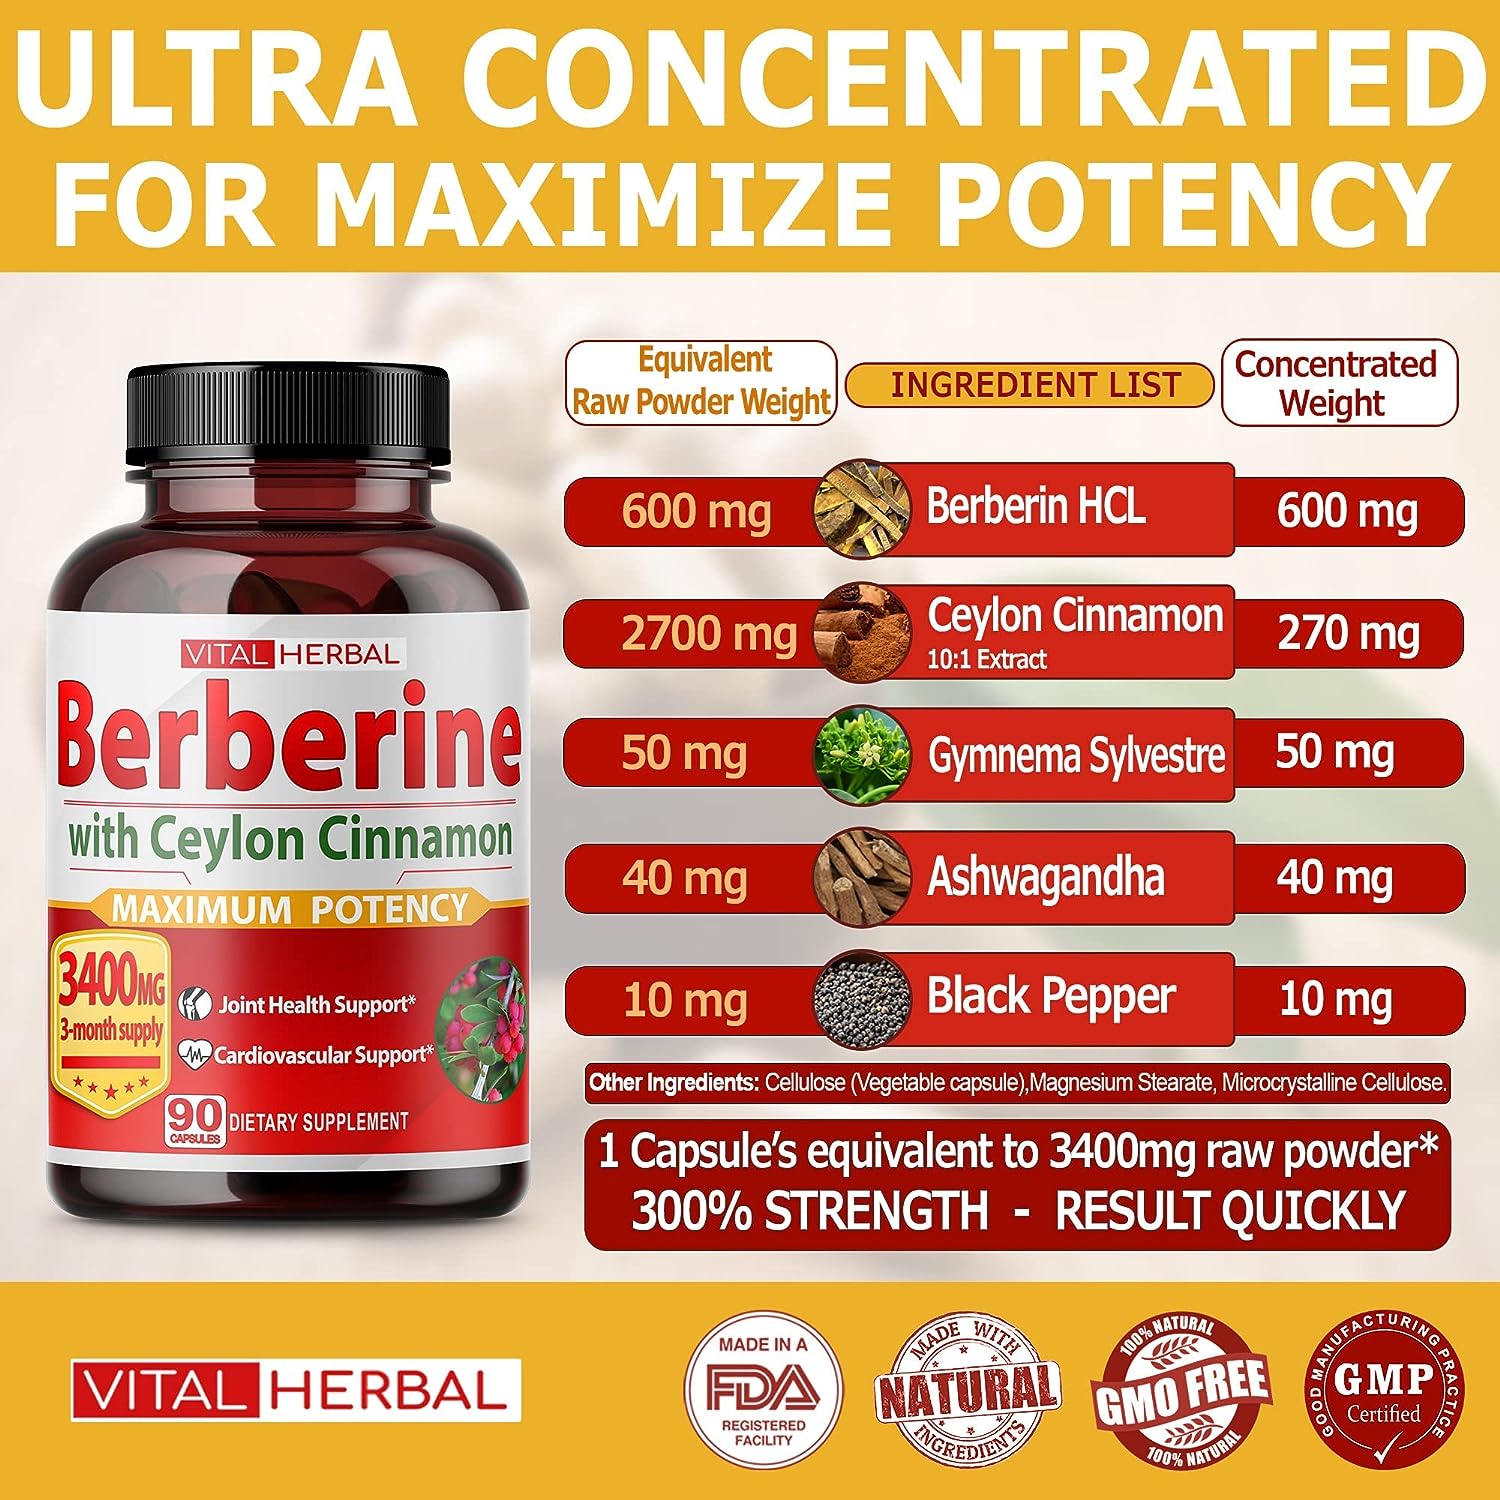 VITAL HERBAL Berberine with Ceylon Cinnamon Capsules Equivalent to 3400 mg Maximum Potency with Gymnema Sylvestre Ashwagandha Black Pepper - Glucose Metabolism Support - 90 Days Supply